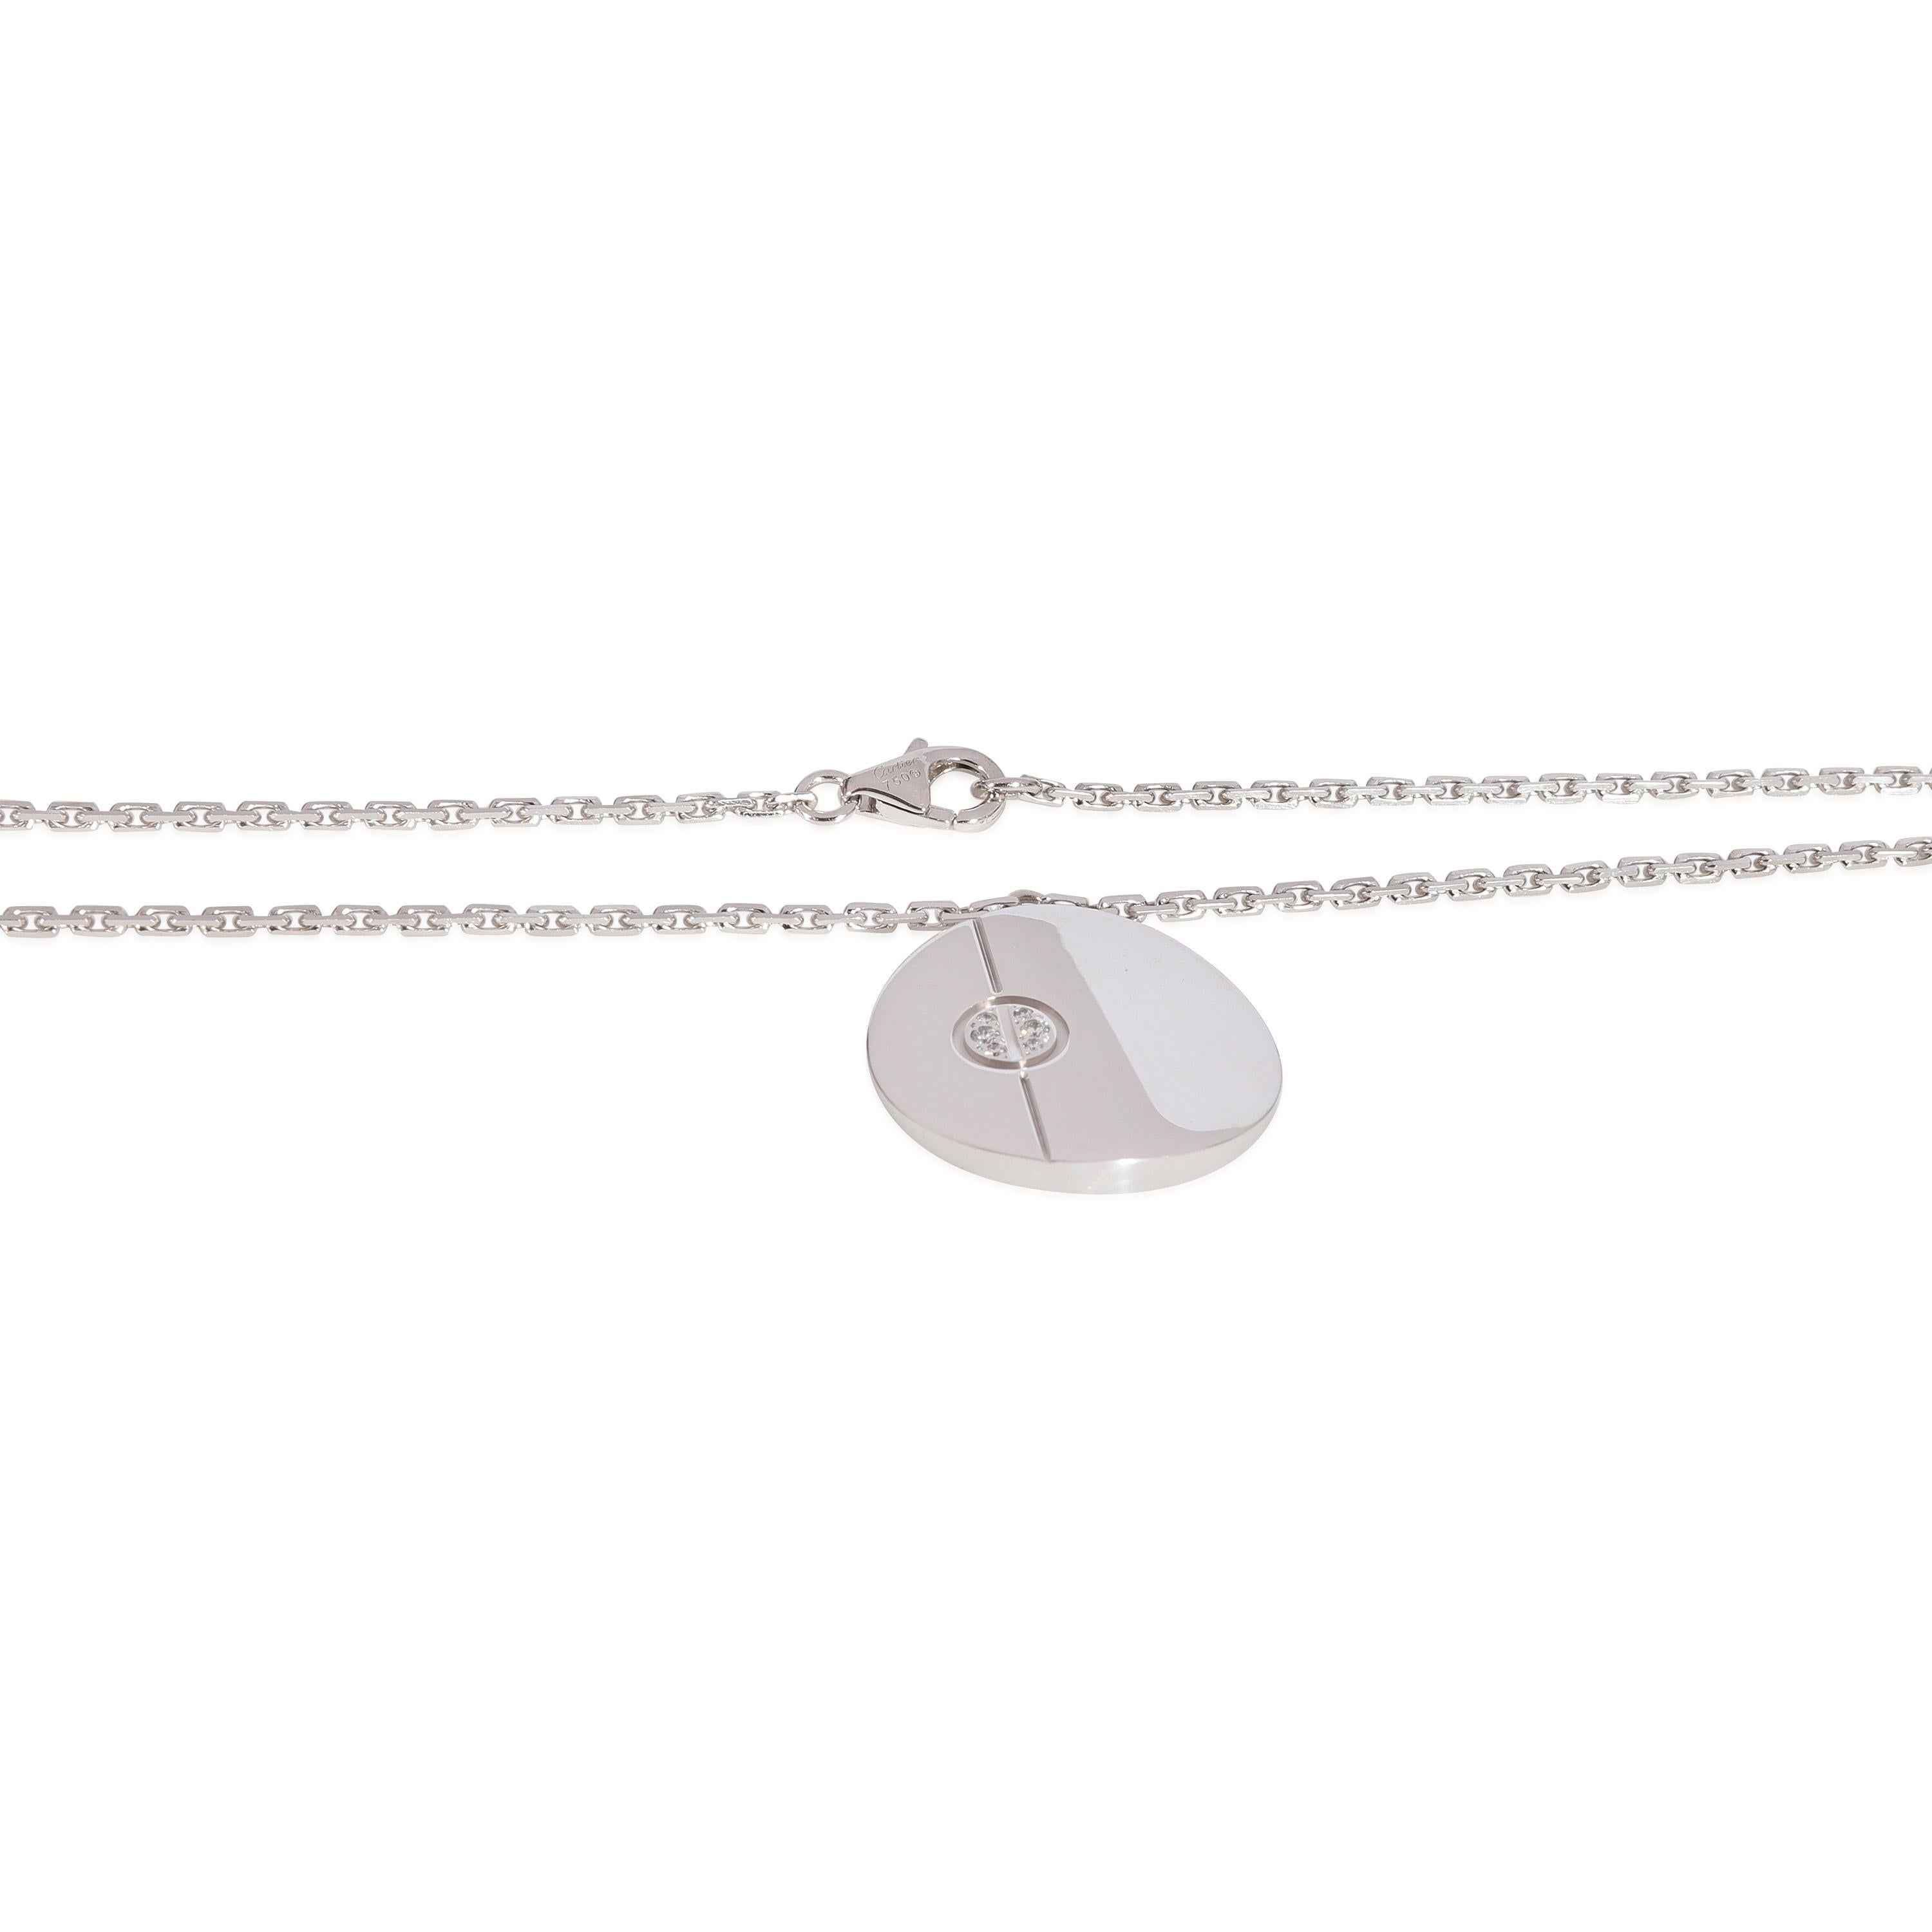 Cartier Love Disc Diamond Pendant in 18k White Gold 0.03 CTW

PRIMARY DETAILS
SKU: 123310
Listing Title: Cartier Love Disc Diamond Pendant in 18k White Gold 0.03 CTW
Condition Description: Retails for 4400 USD. In excellent condition and recently